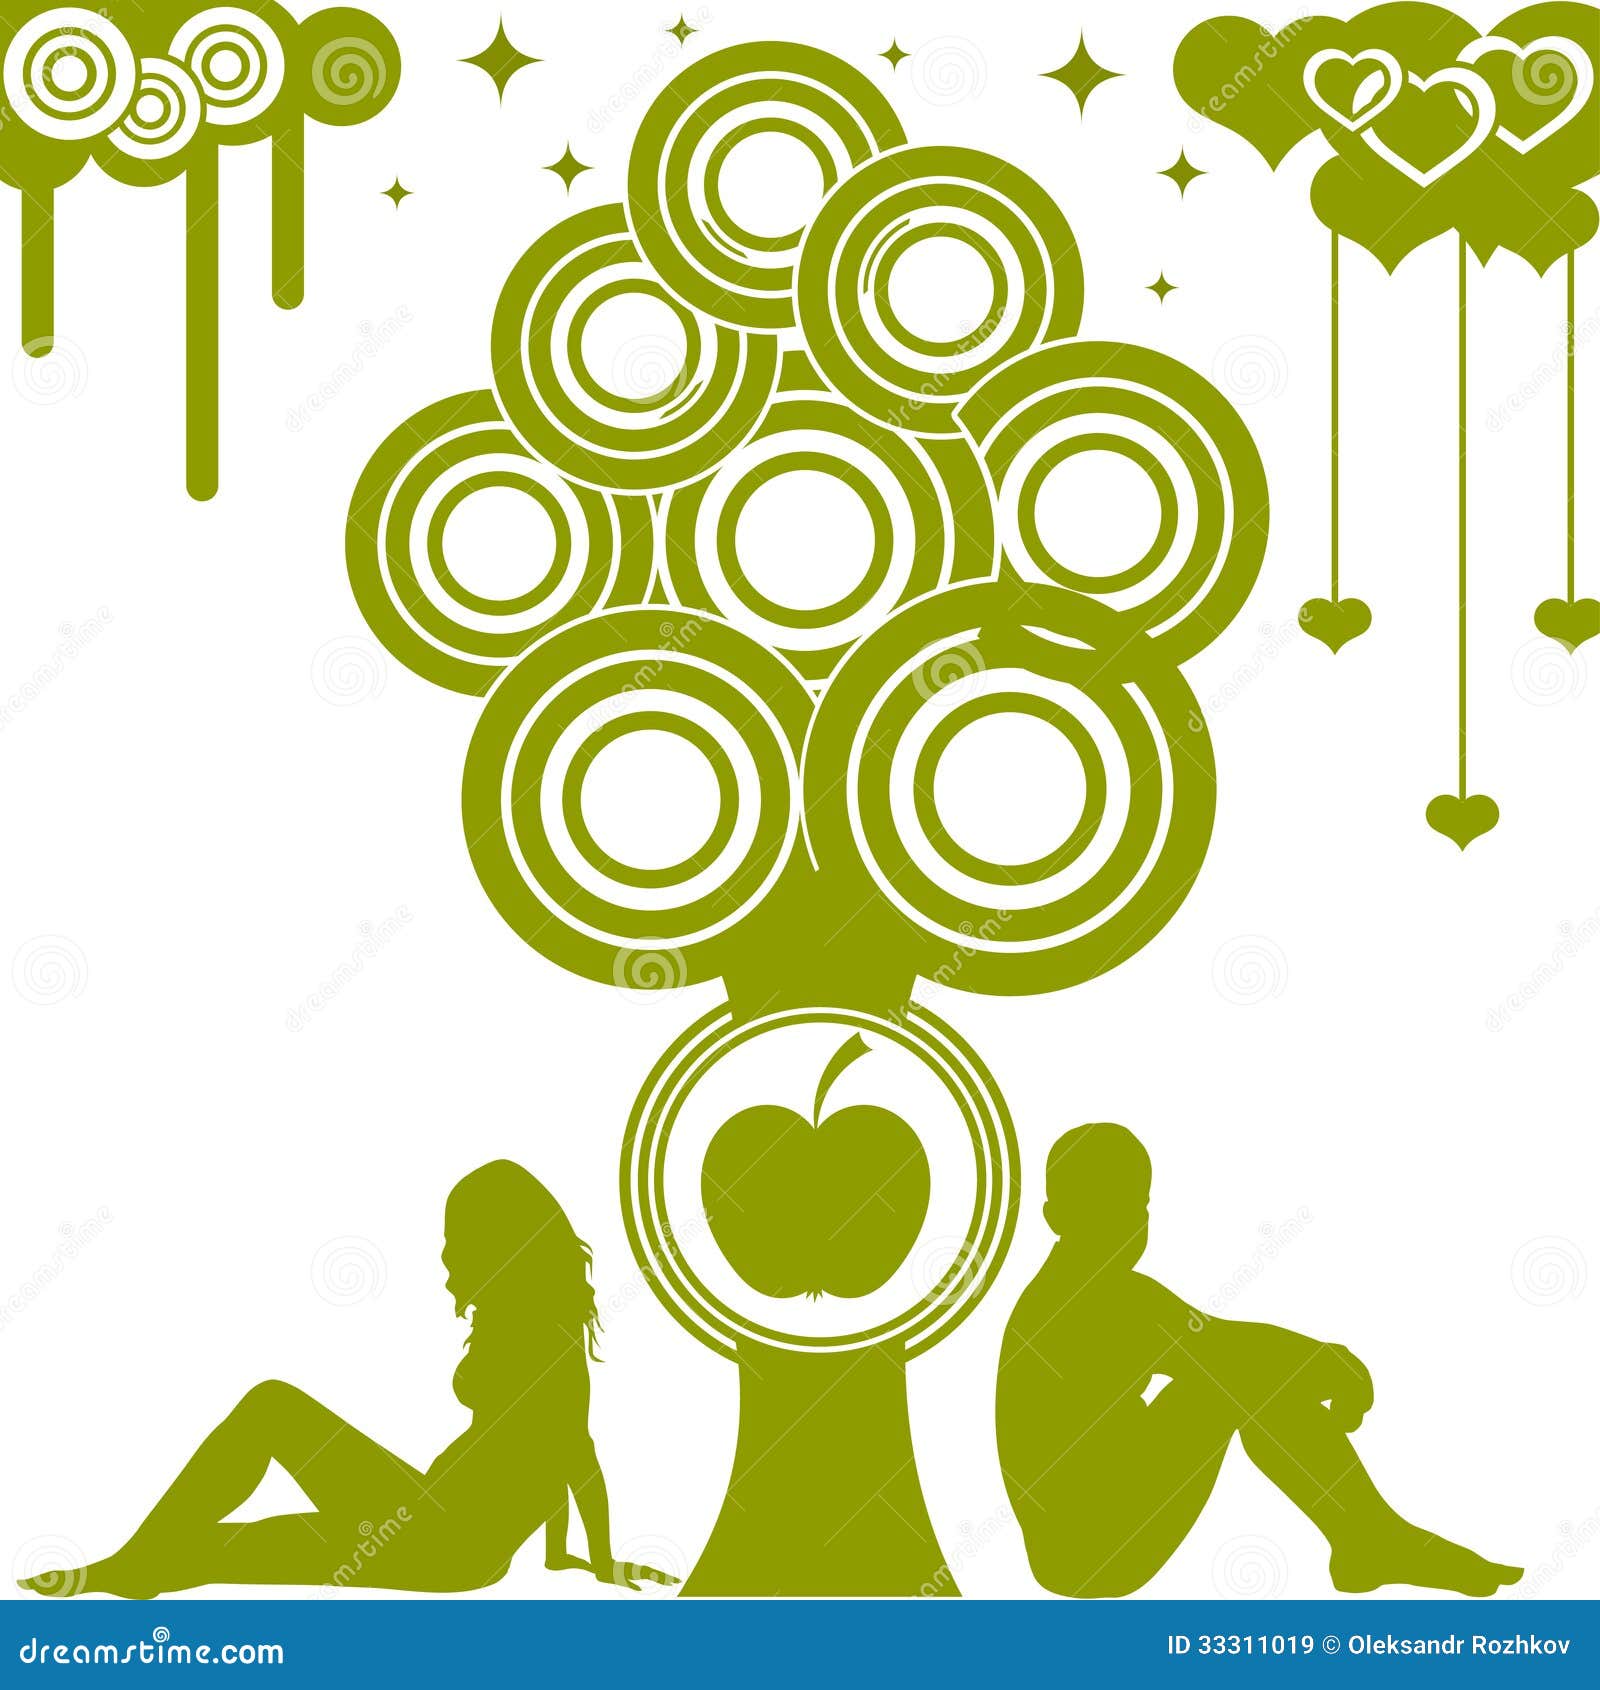 Adam And Eve Eps10 Stock Vector Illustration Of Apple 33311019